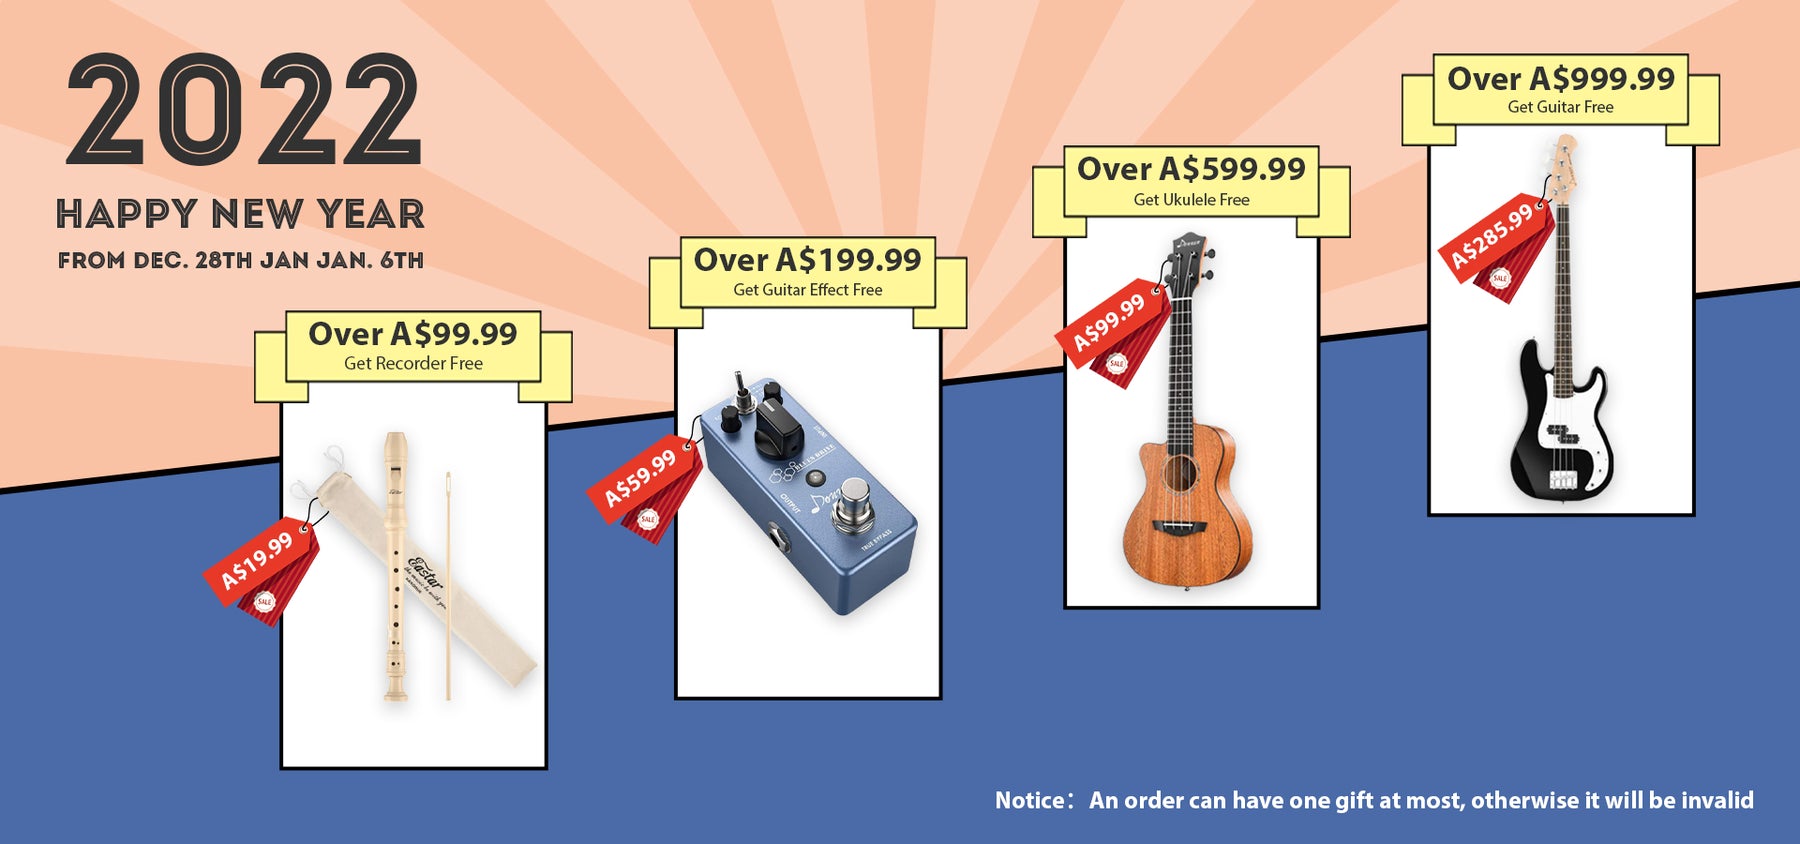 Donner music Spend and receive free recorder, guitar & more